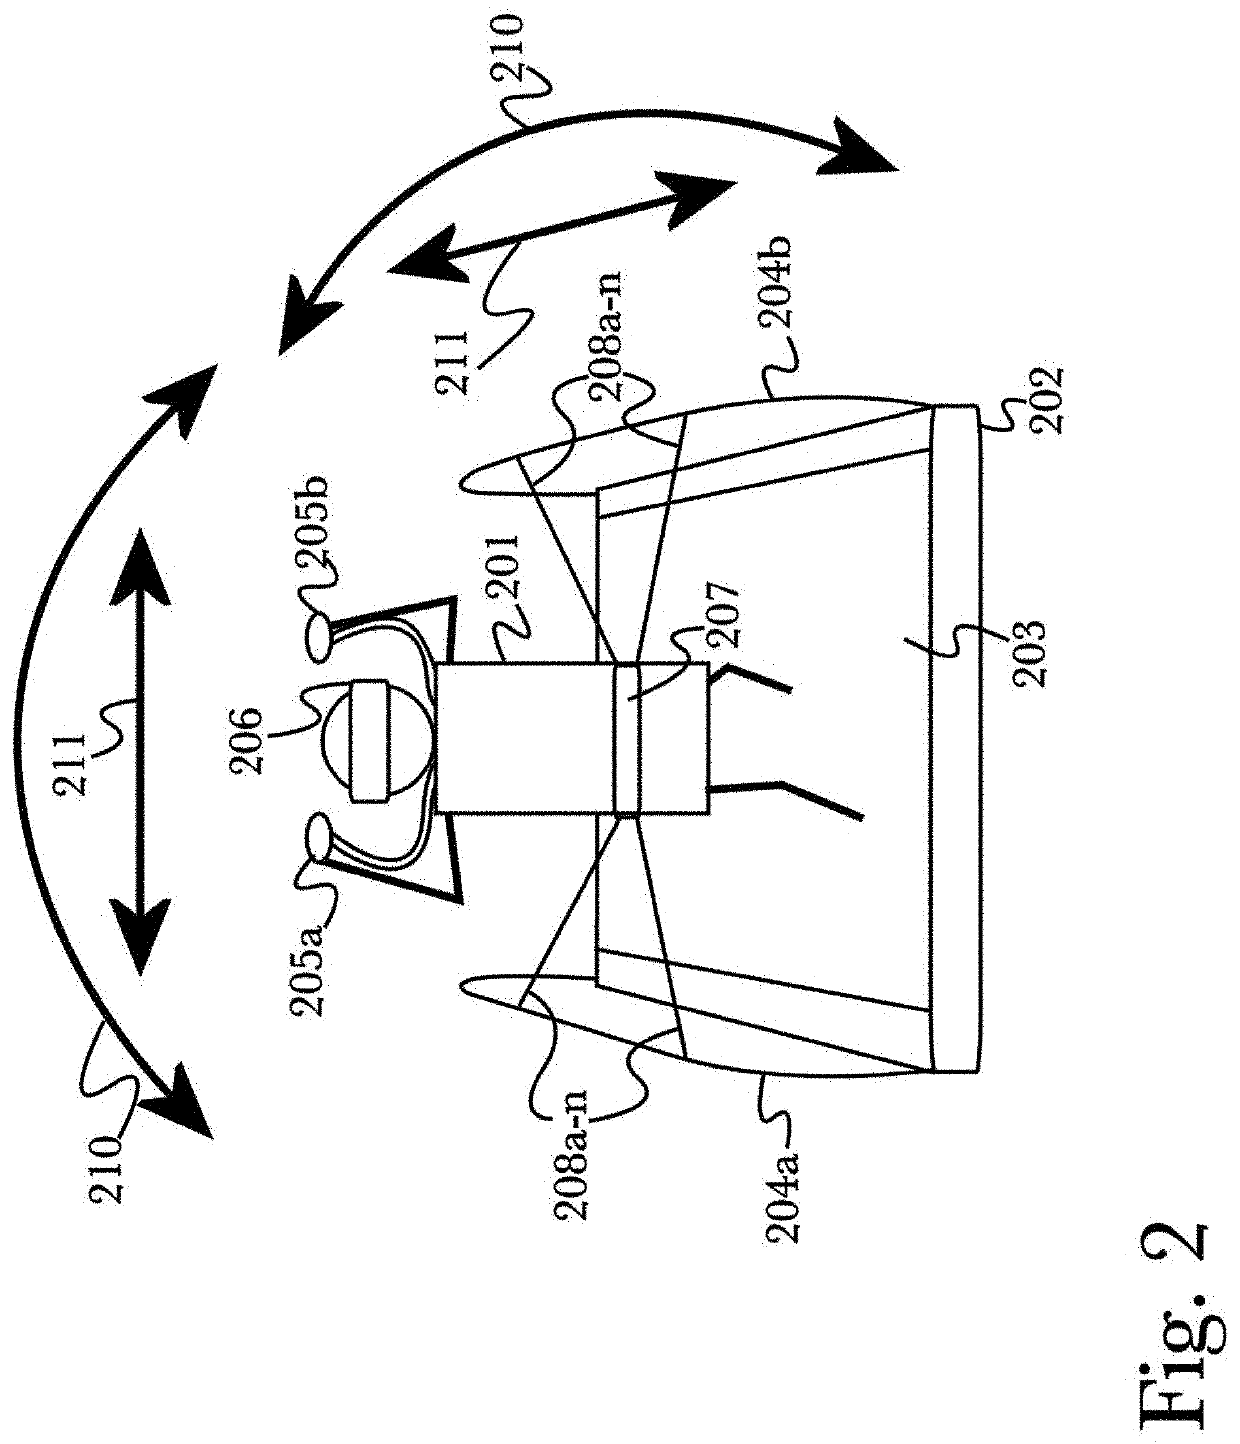 Full body movement control of dual joystick operated devices